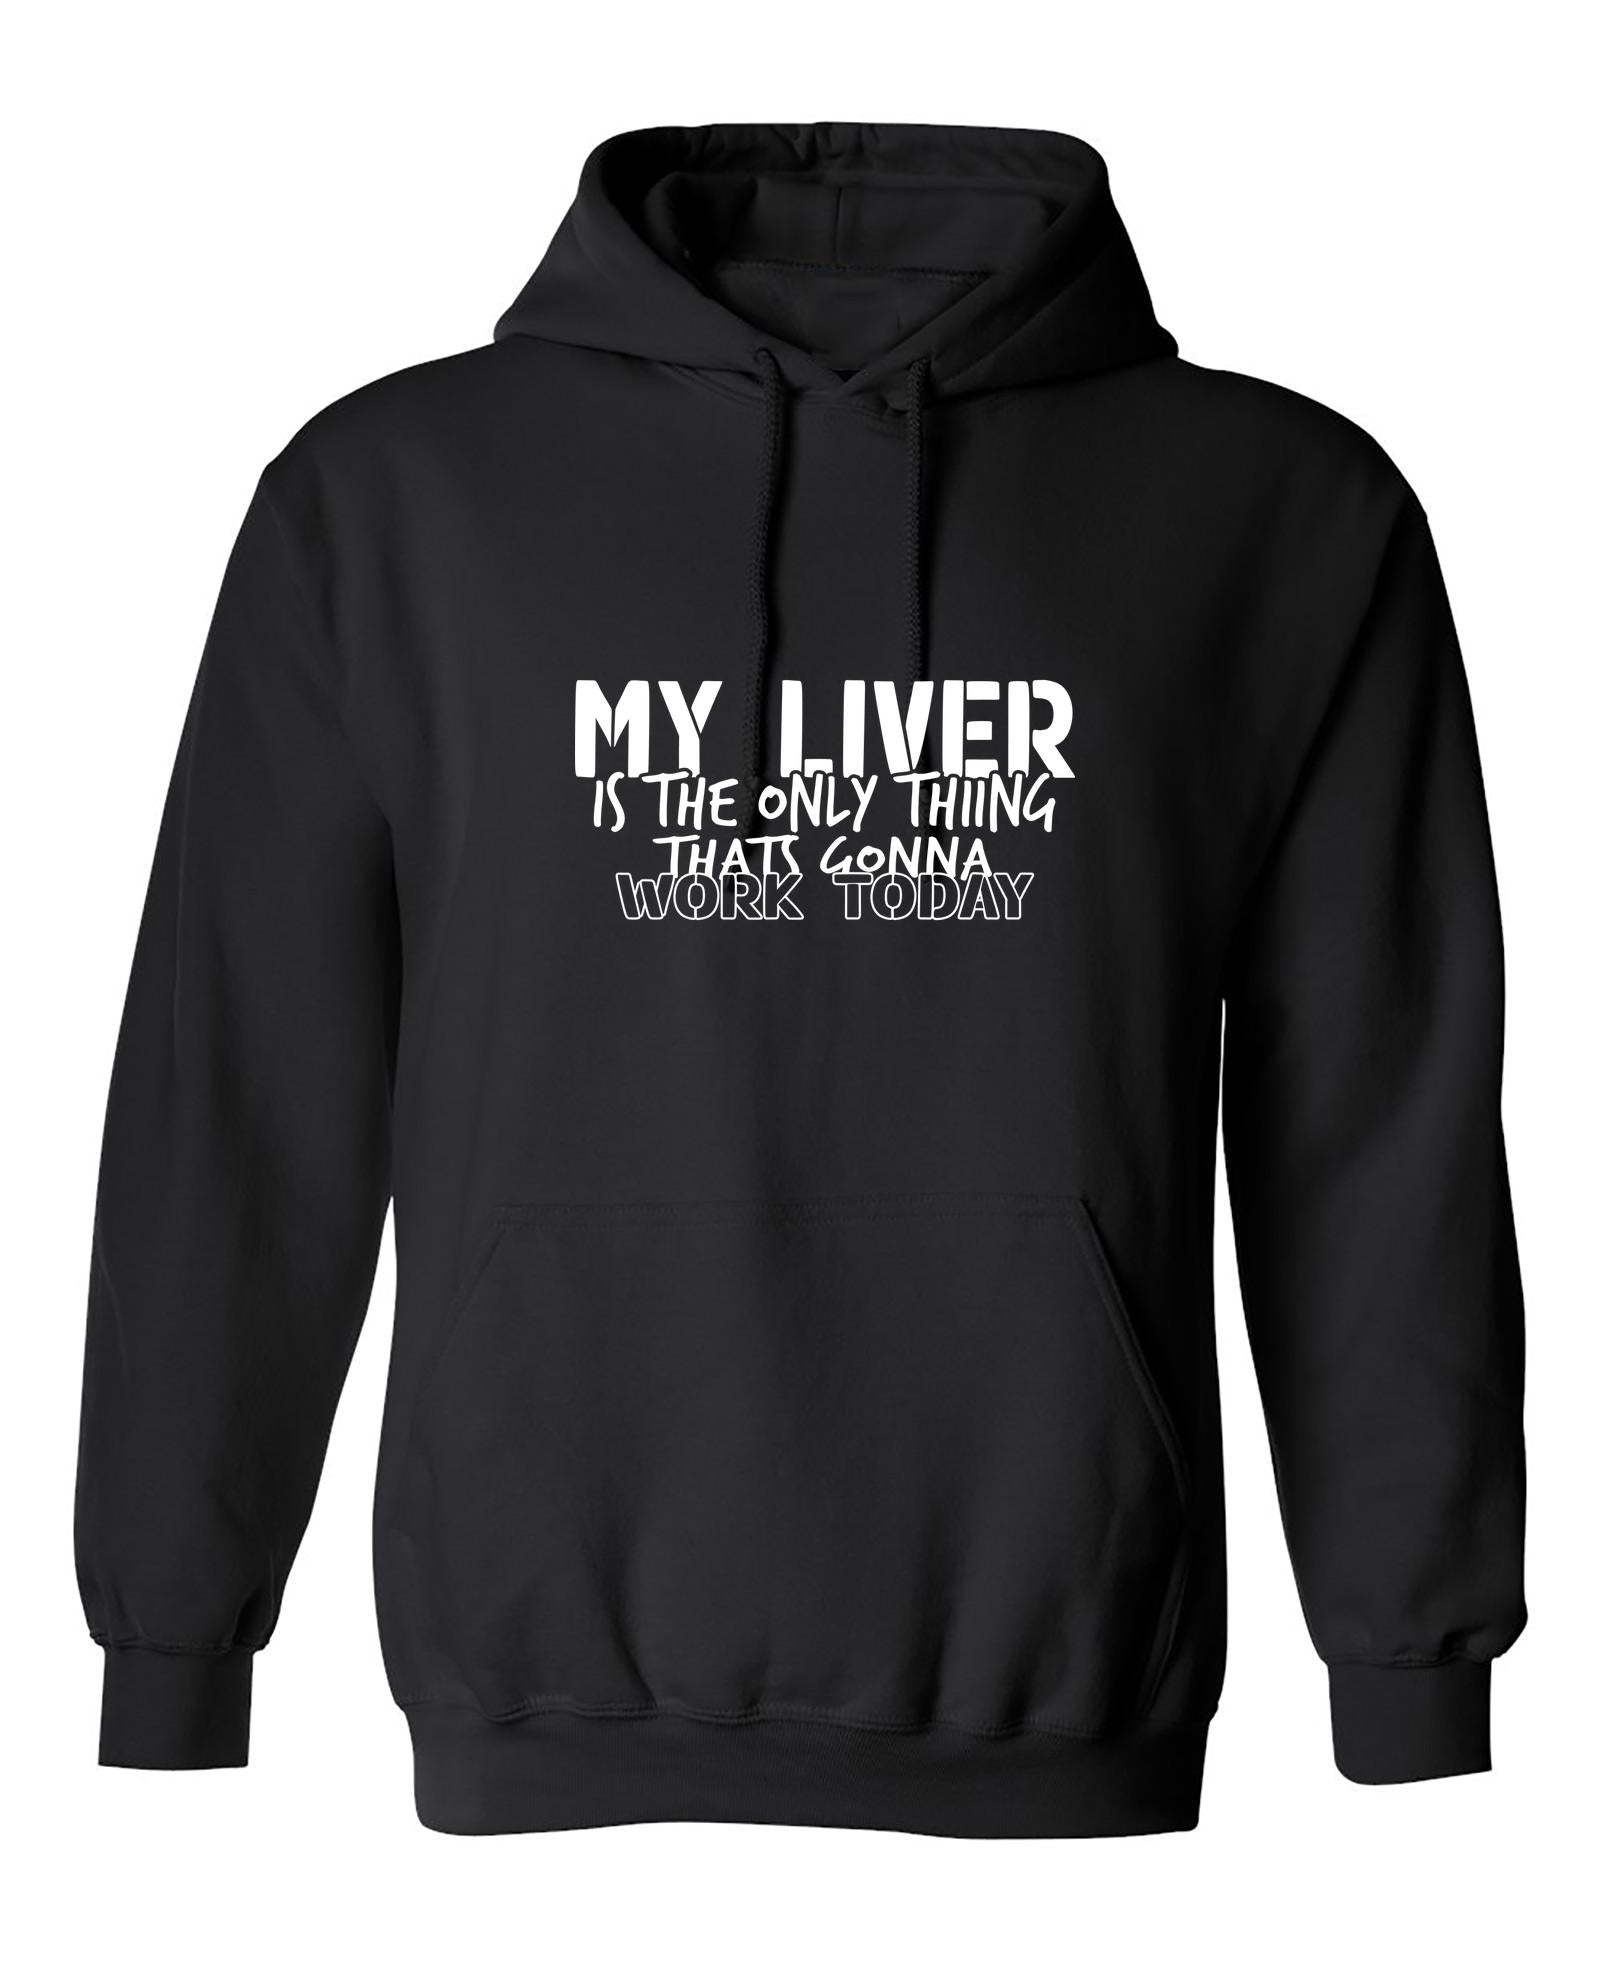 Funny T-Shirts design "My Liver is the Only Thing That’s Gonna WORK TODAY"